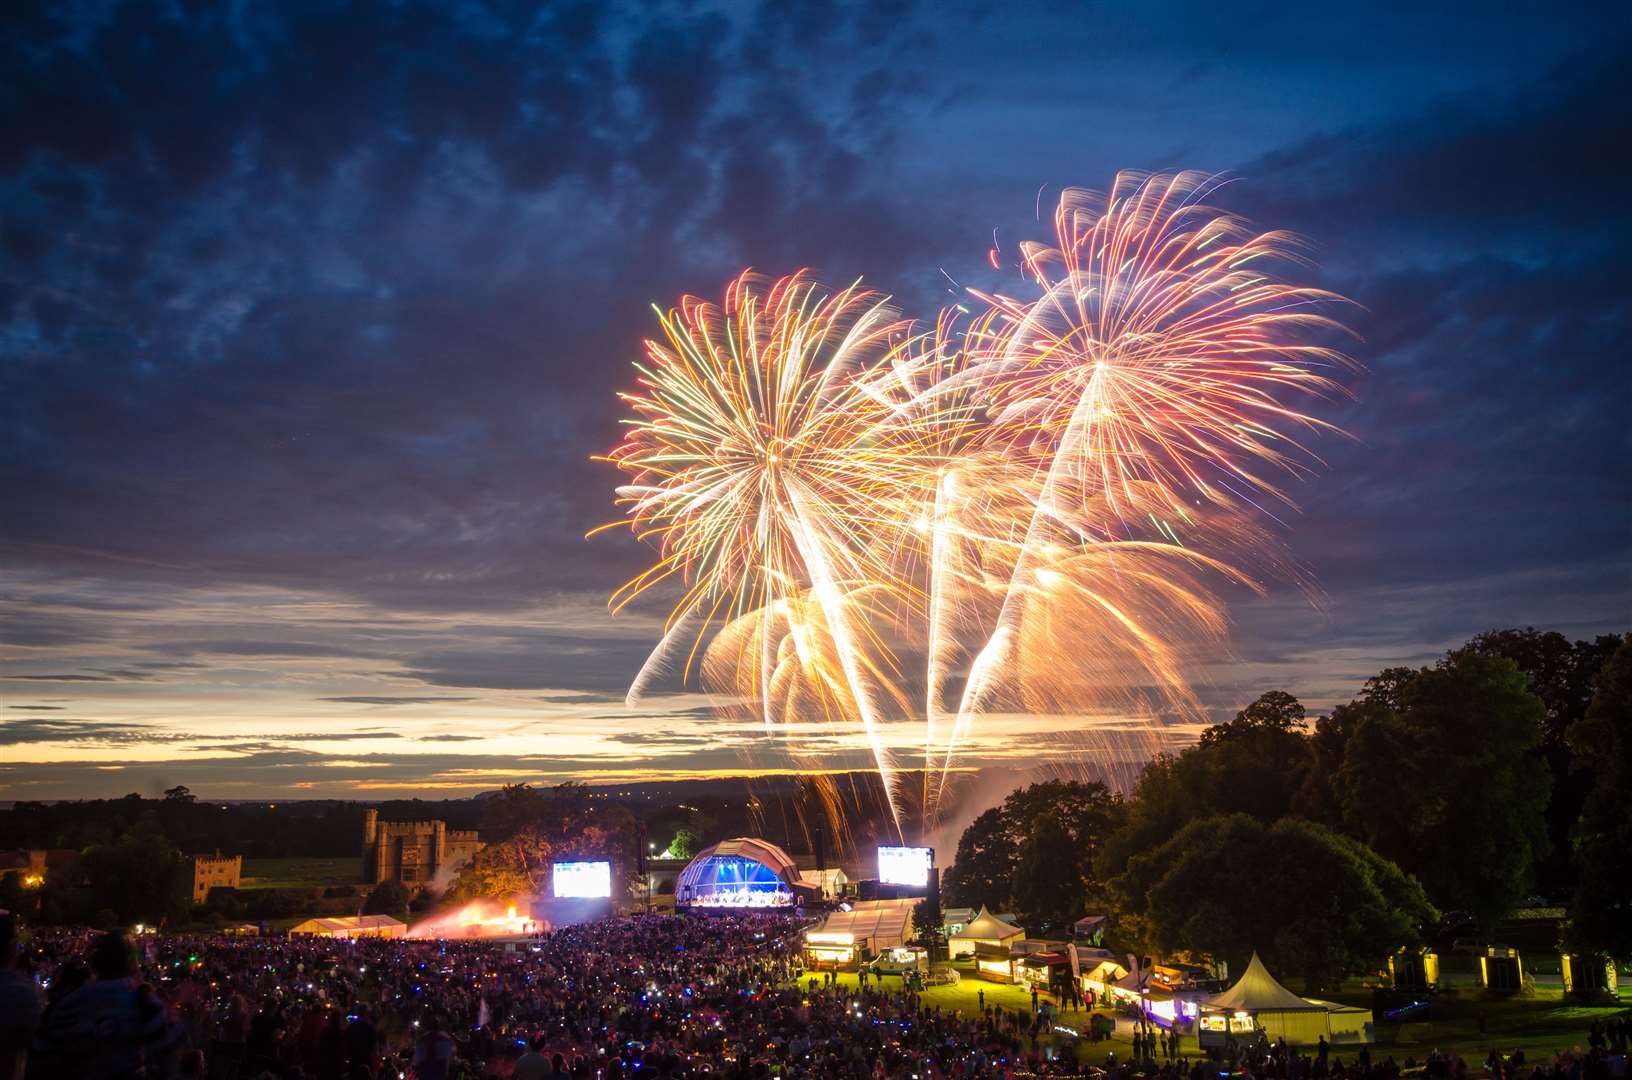 The Leeds Castle Concert will be back this year